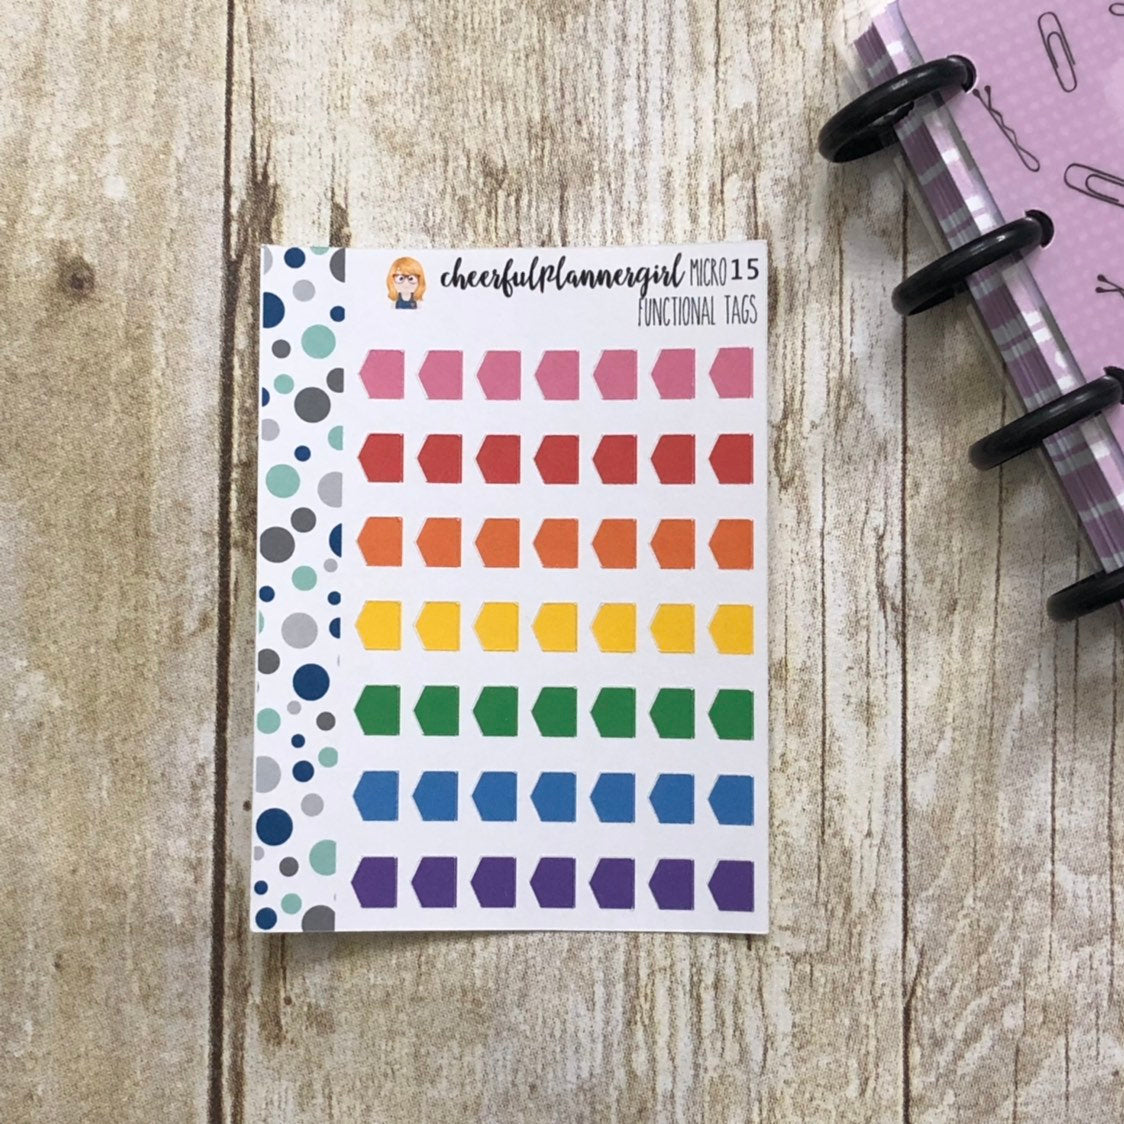 Rainbow Functional Tags Planner Stickers